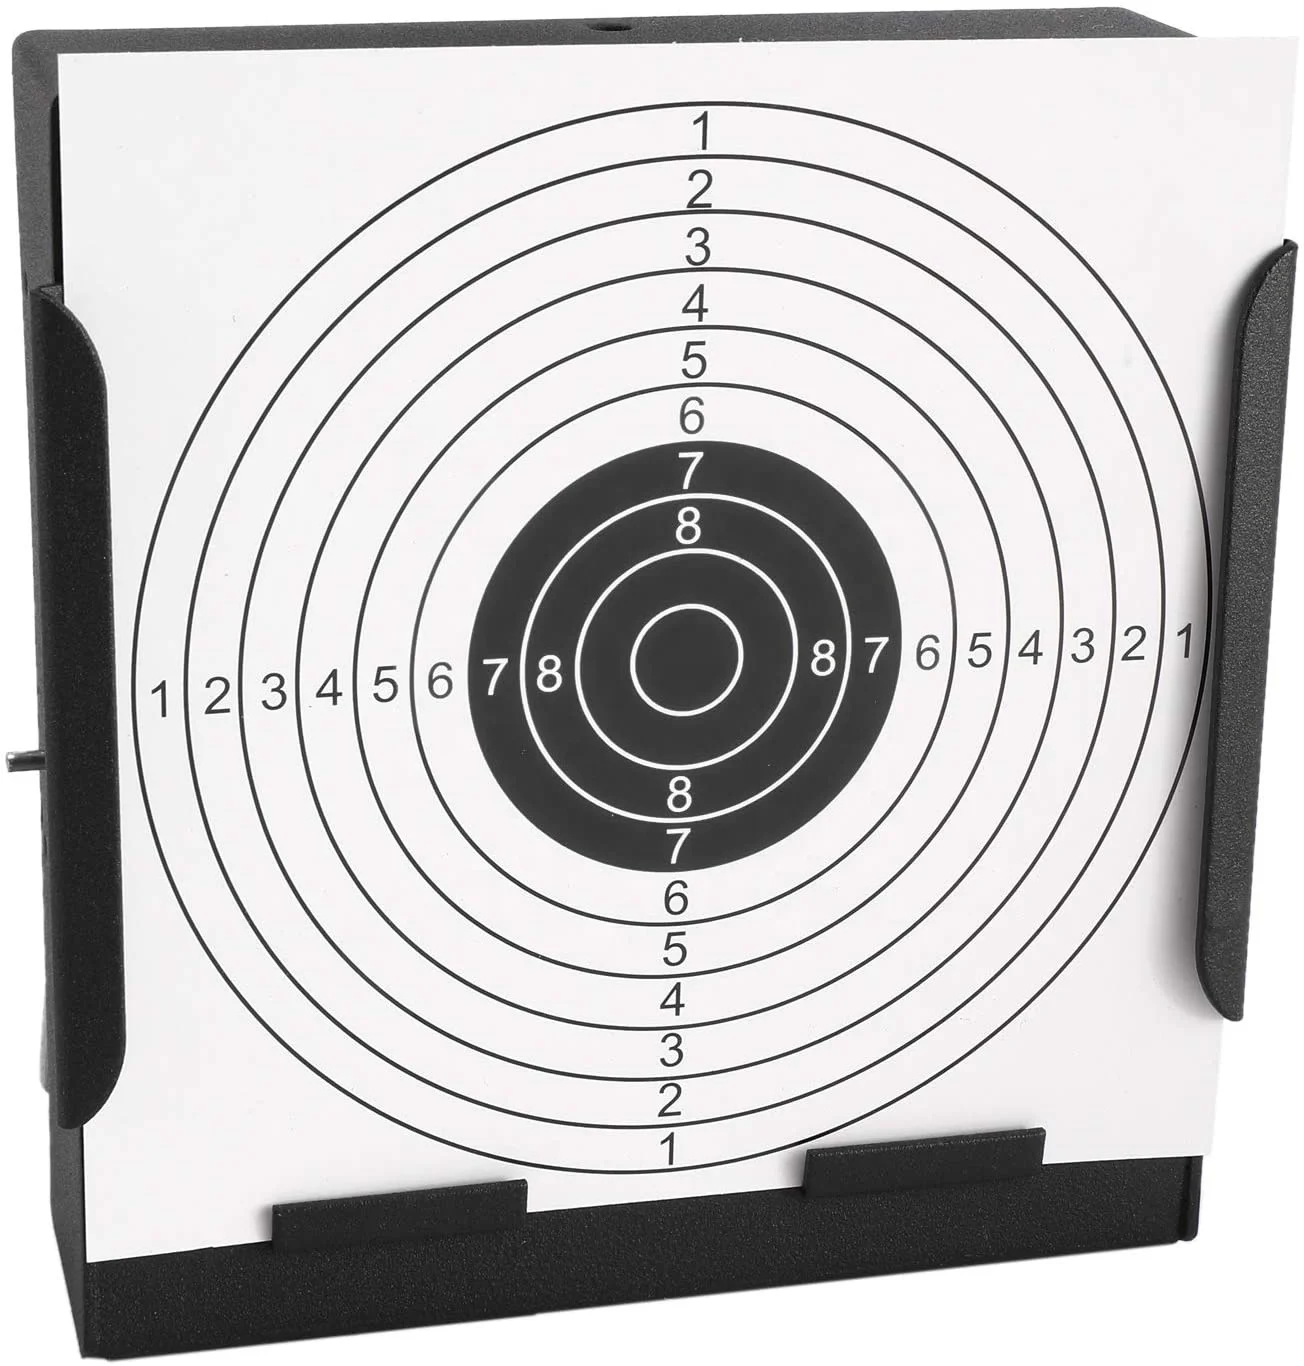 

Metal Box Target with 20 Shooting Paper Targets, Airsoft Pellet Trap Catcher, for Shooting Practice and Air Soft Gun Training